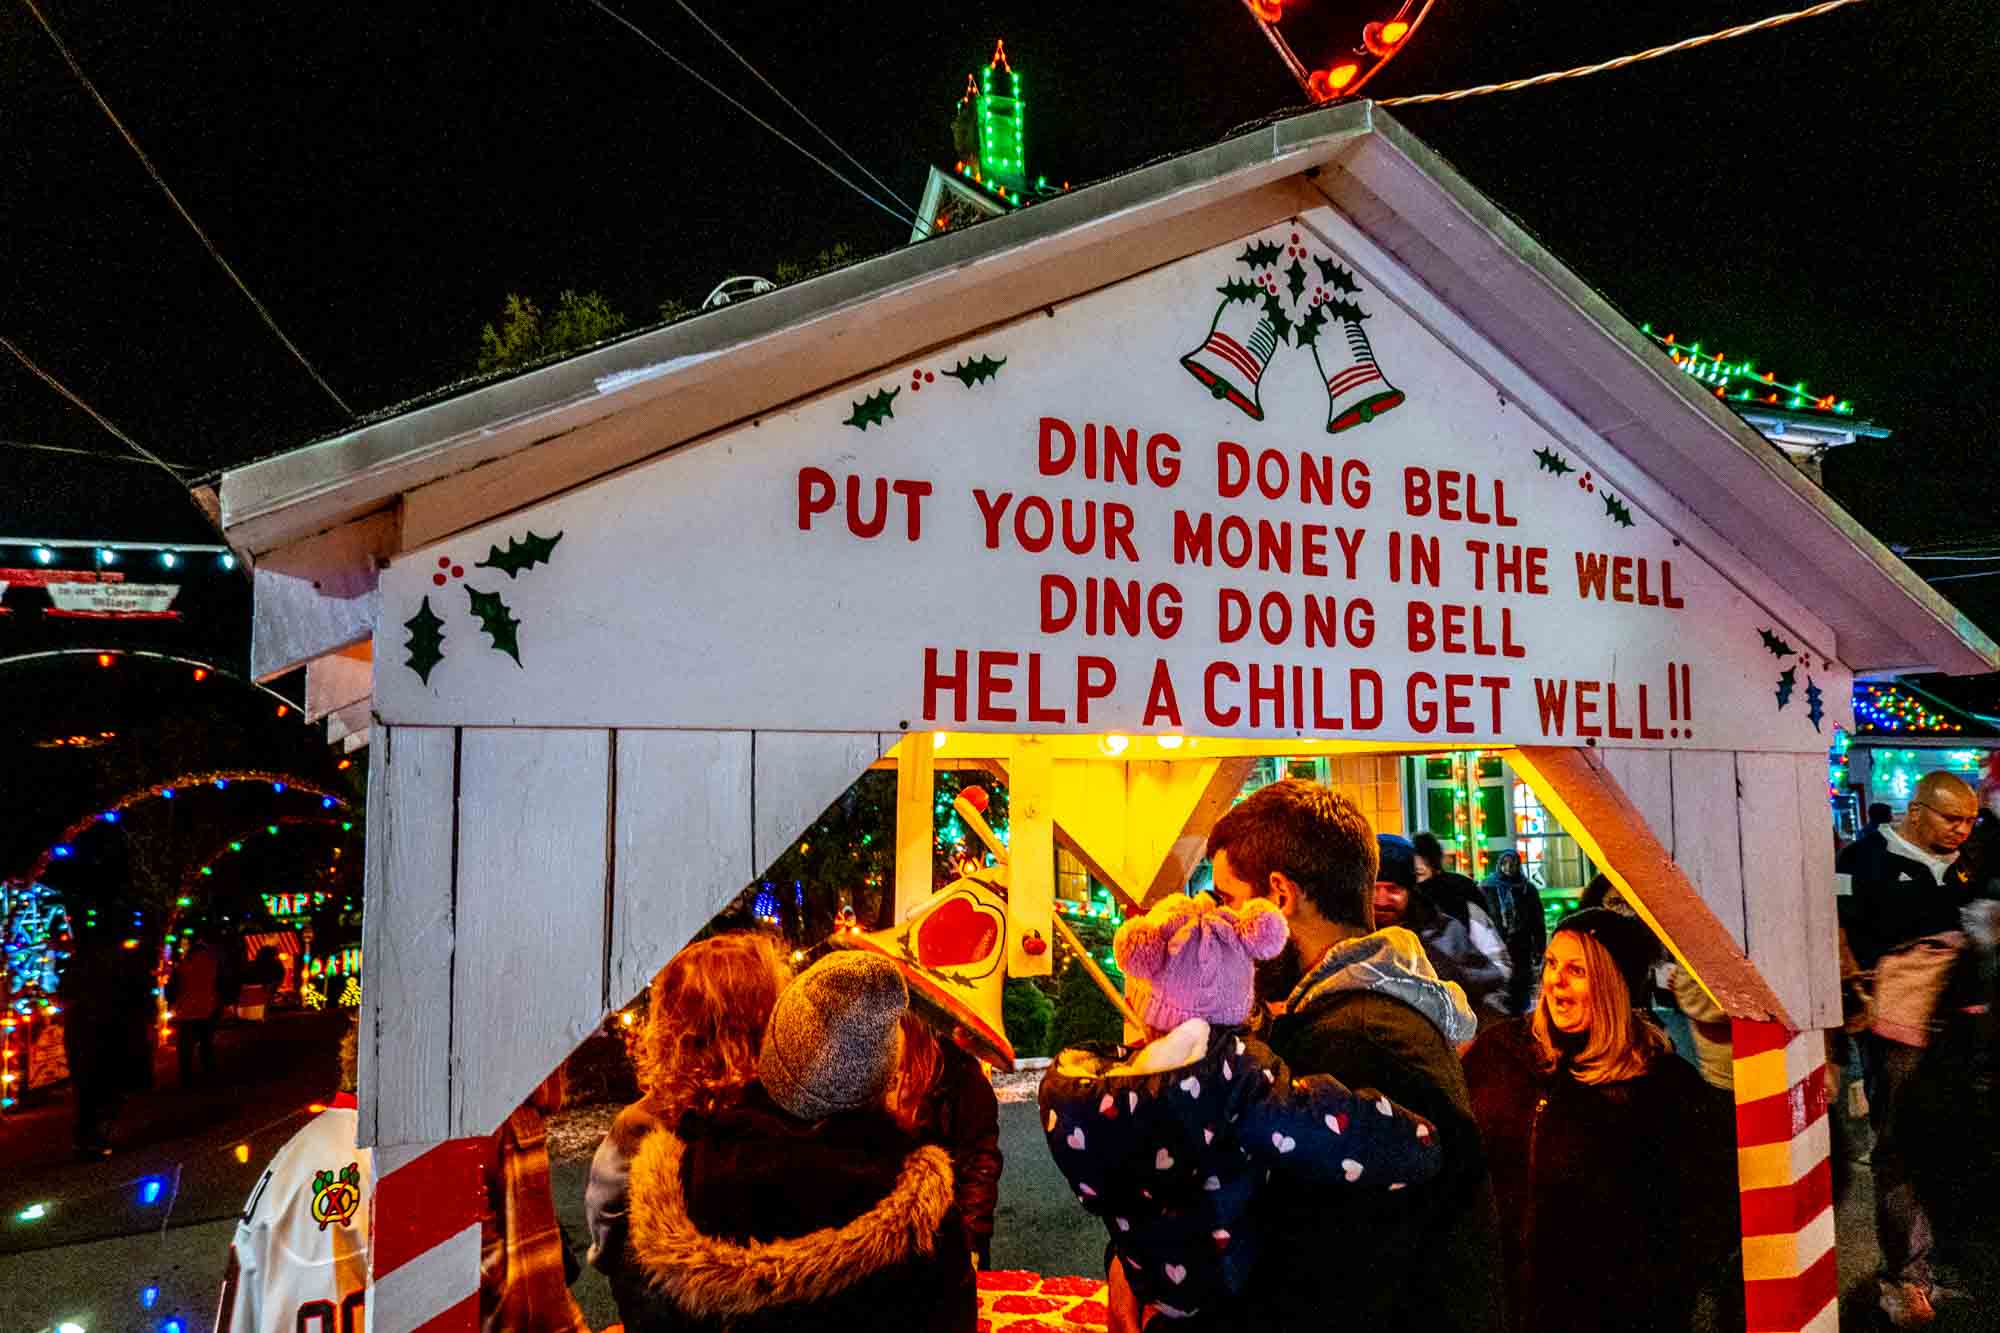 Covered charity wishing well with sign that says, "Ding Dong Bell; Put Your Money in the Well; Ding Dong Bell; Help a Child Get Well!!"